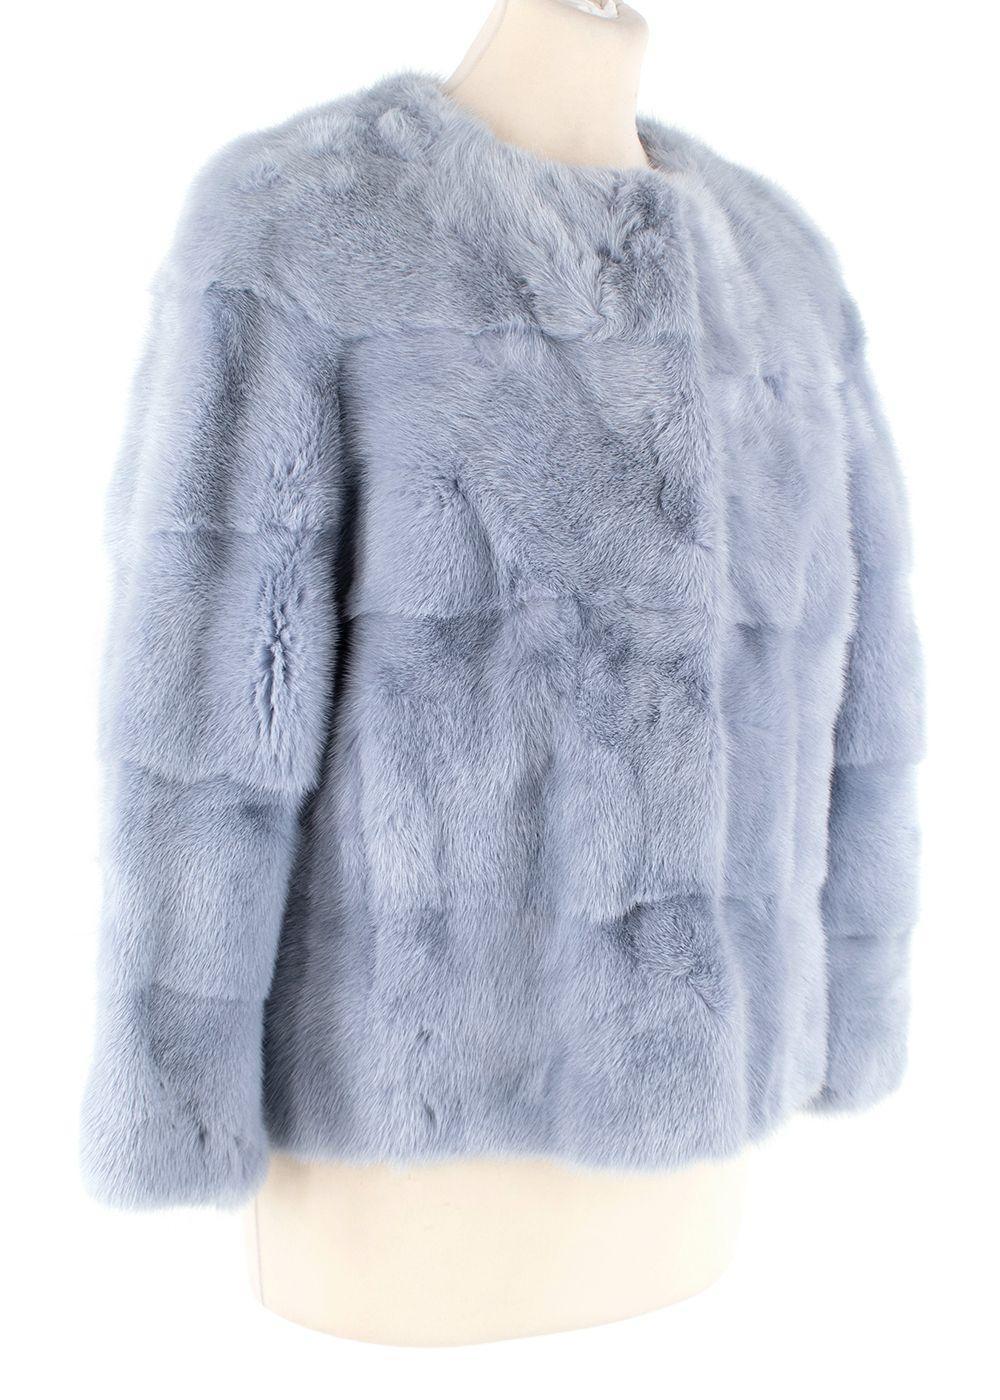 Lilly e Violetta Light blue mink vison cropped sleeved jacket

-Fully lined 
-Dyed blue mink body 
- Bracelet sleeves 
- Hook fastening along the frong 
- Round neckline 
- Two pockets at the waist 

Material: 

Viscose 
Mink 

Made in Italy
Dry